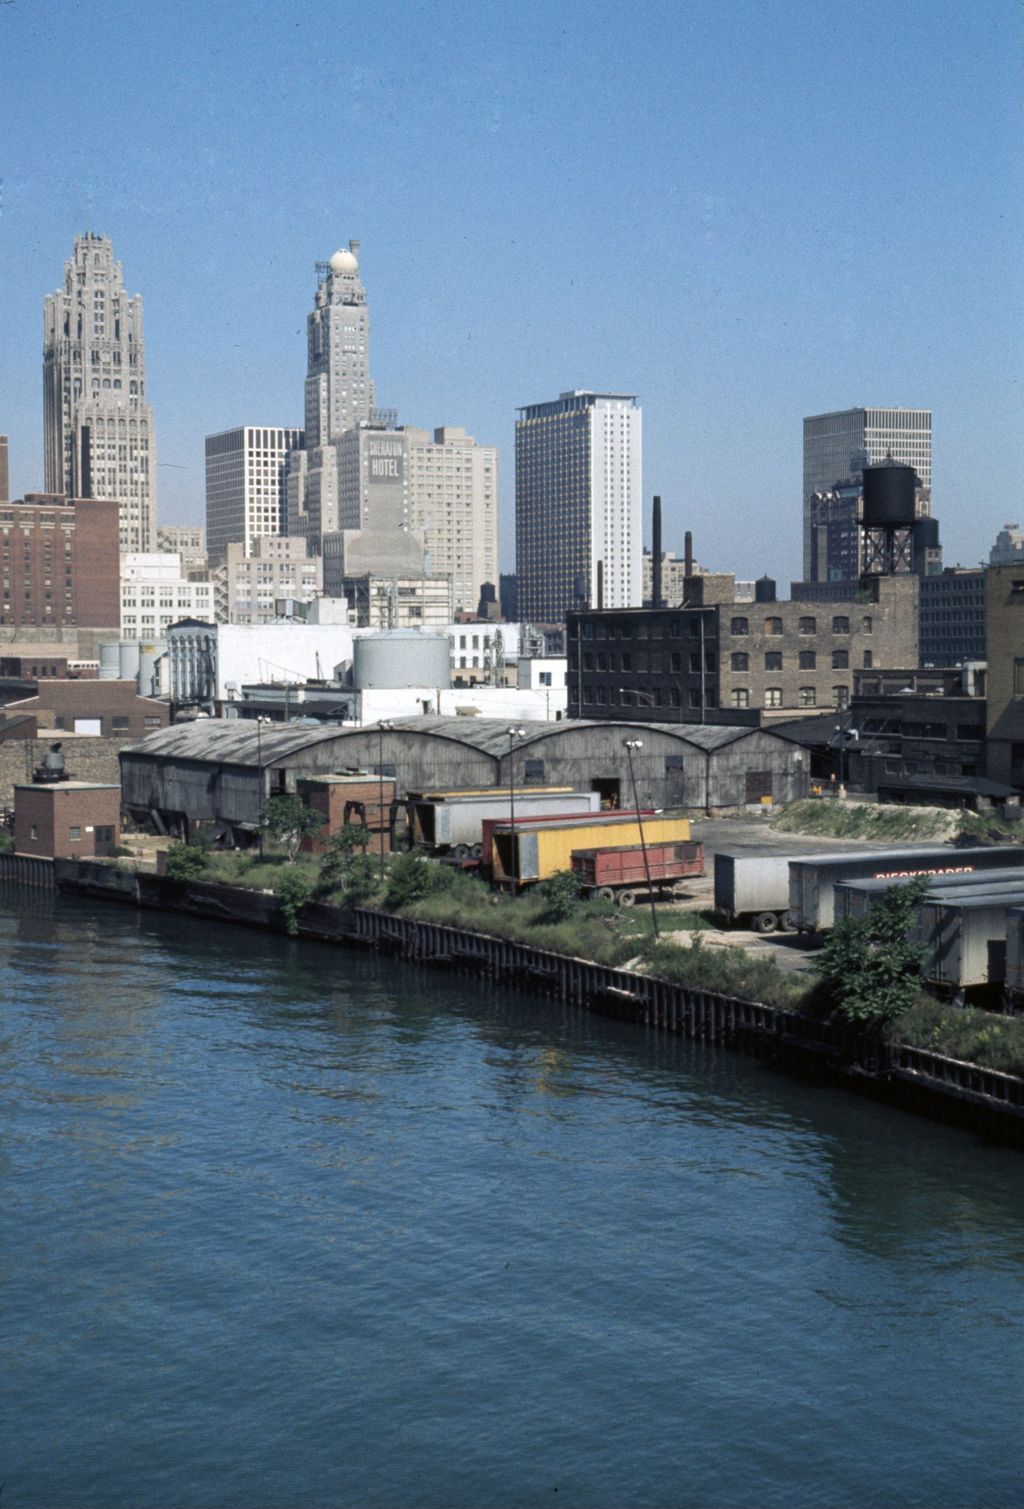 Miniature of Storage facilities along the Chicago River